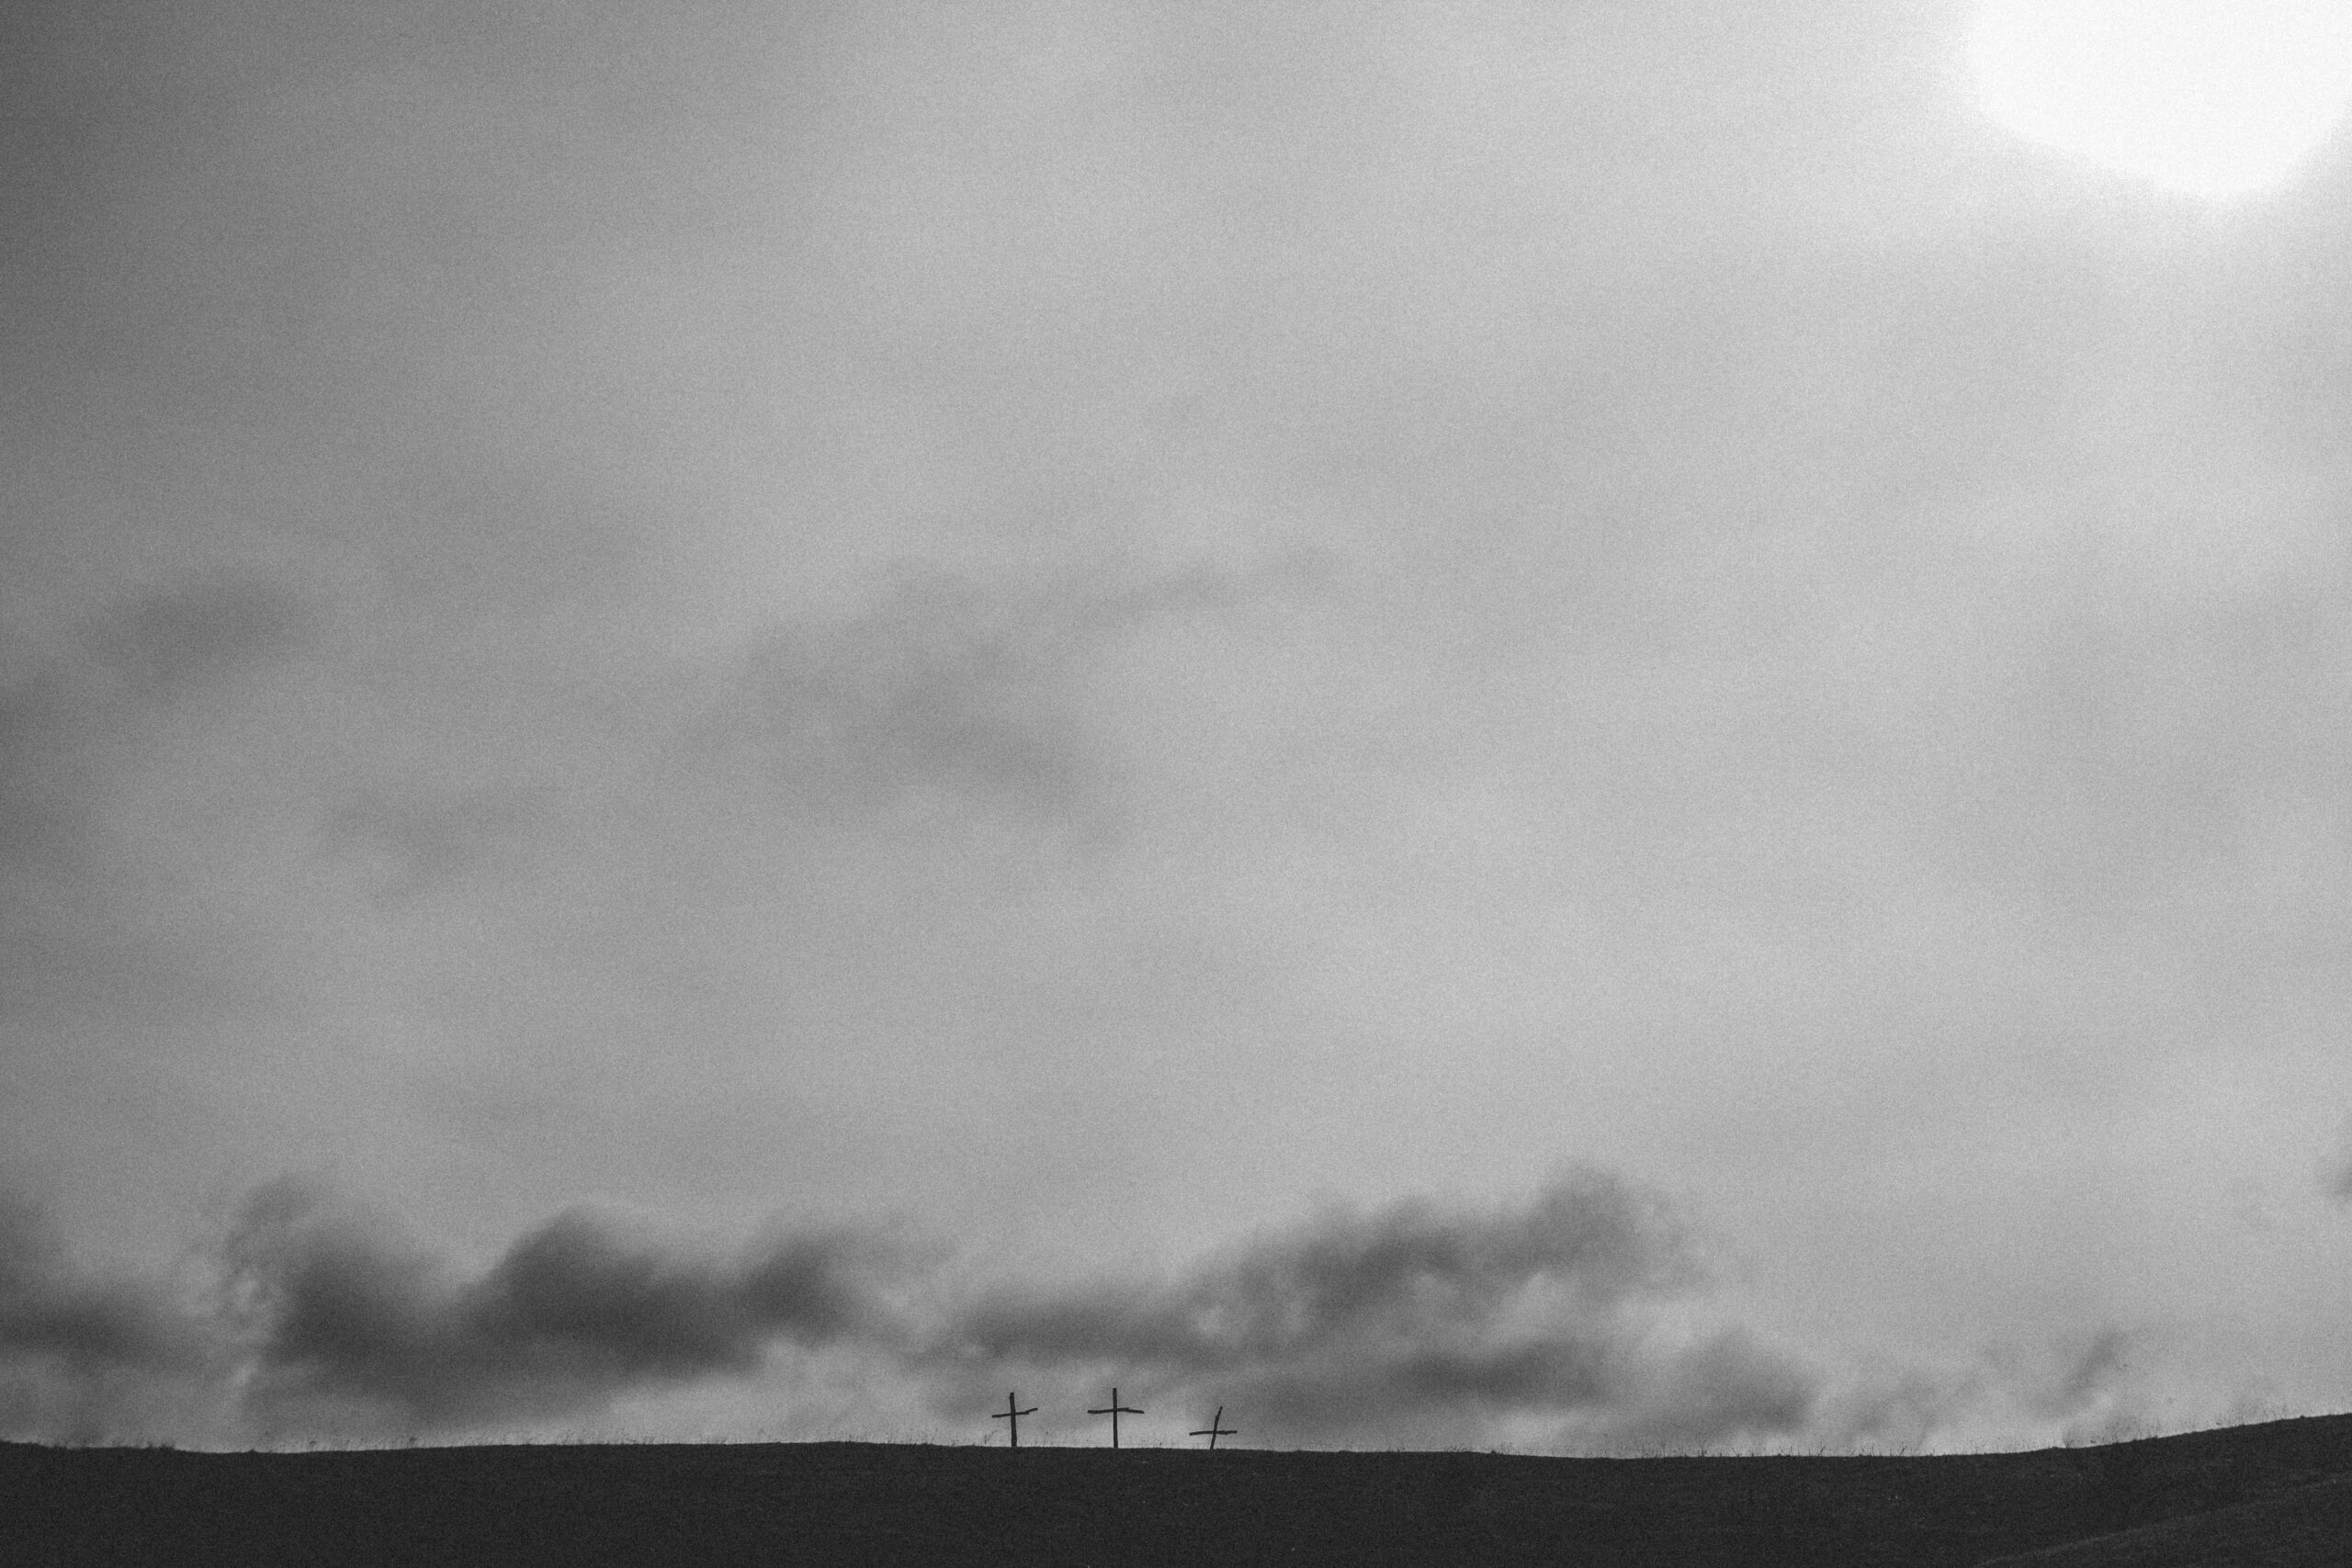 Three wooden crosses on a grey hill with a grey sky.